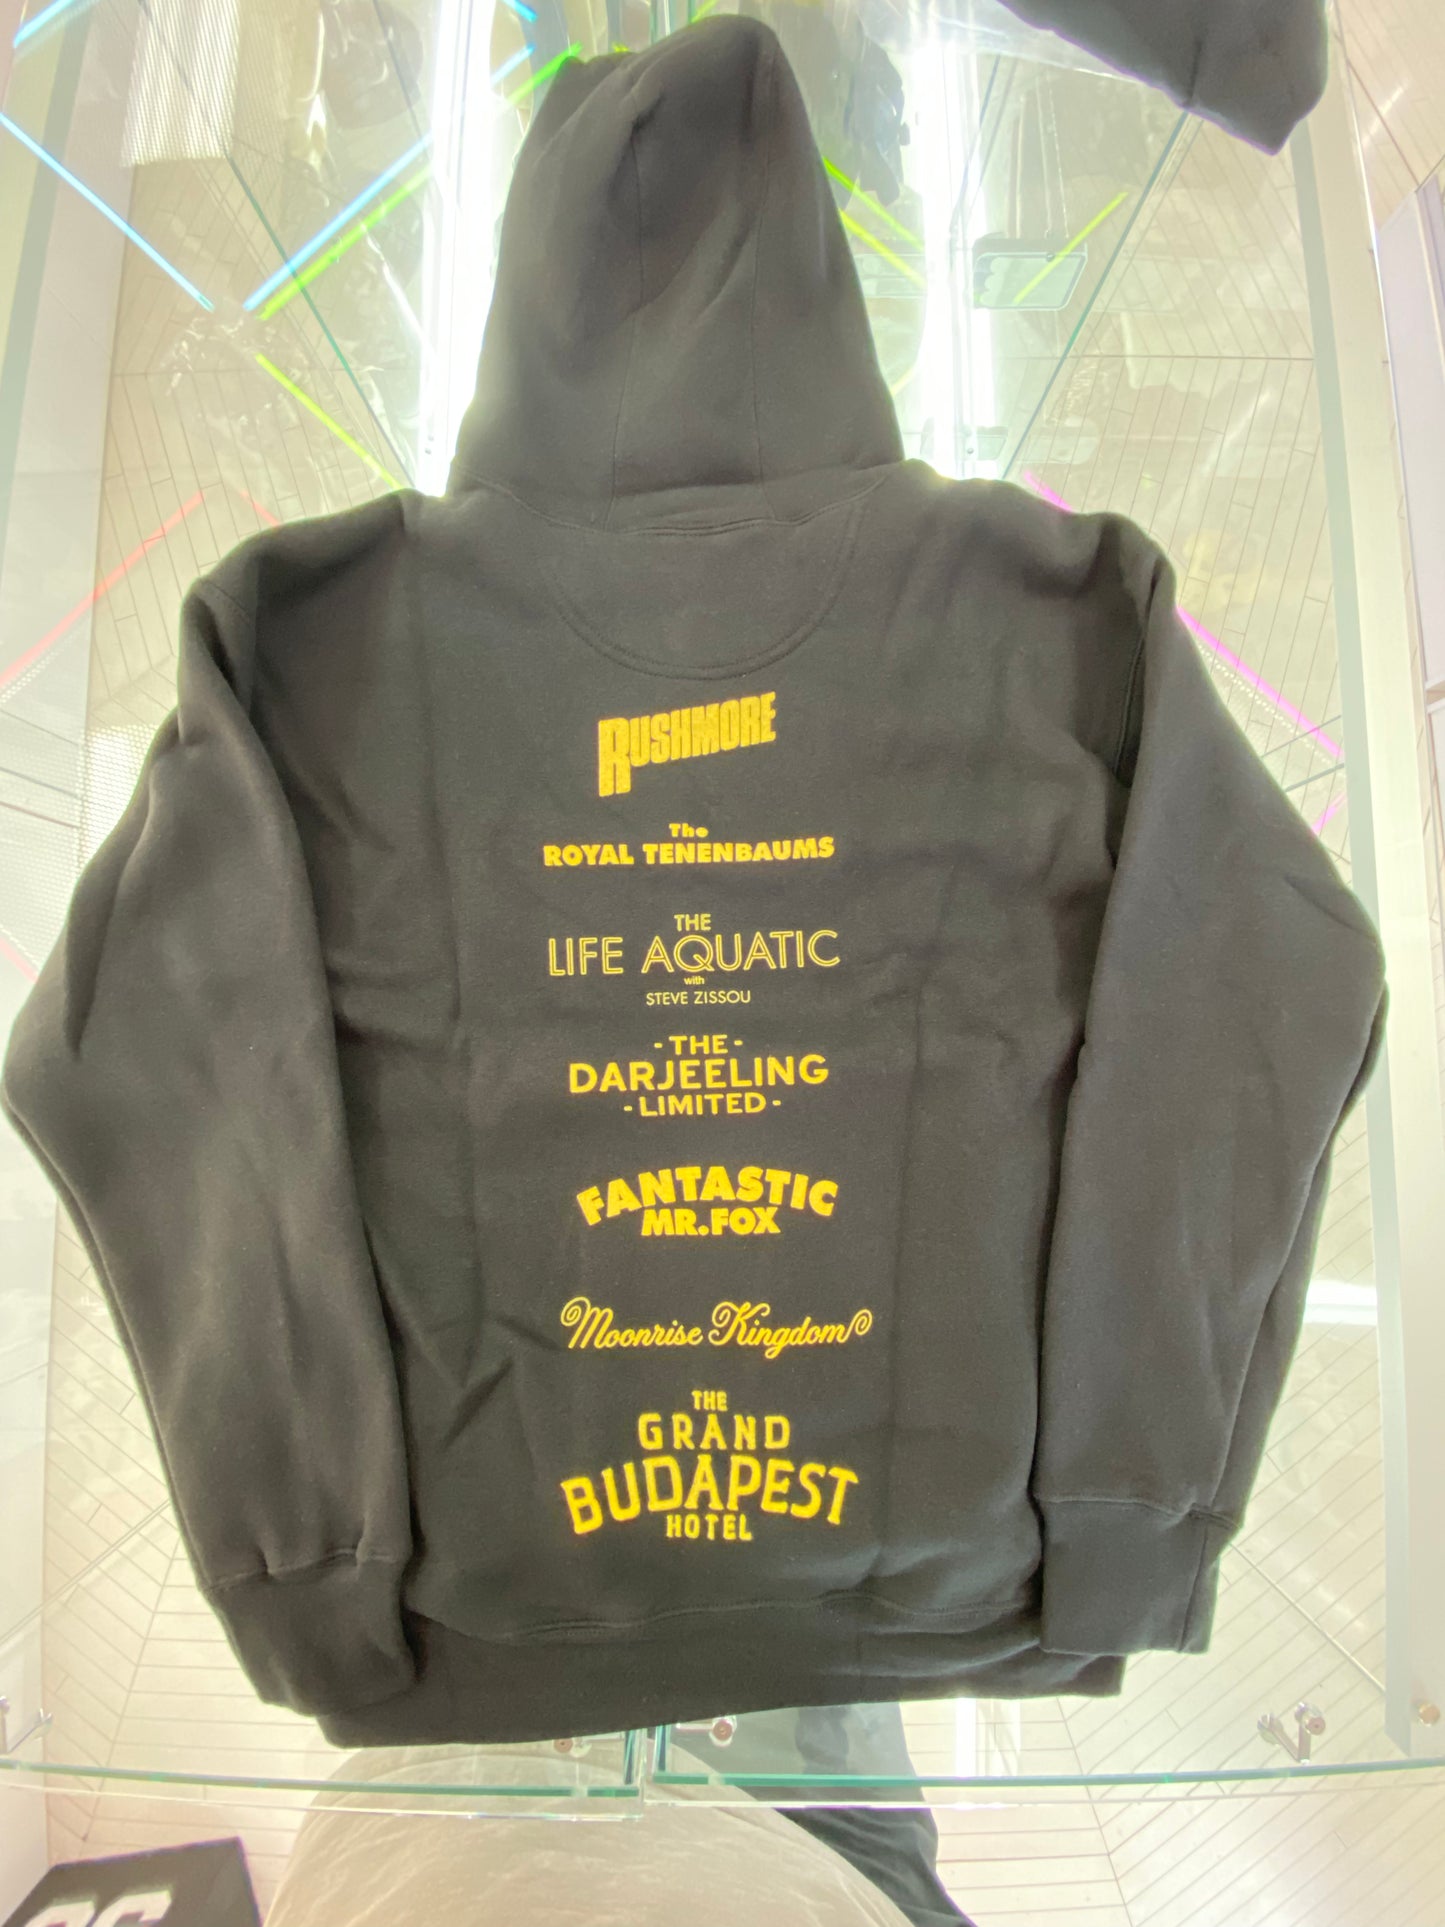 OB Wes Anderson made it hoodie